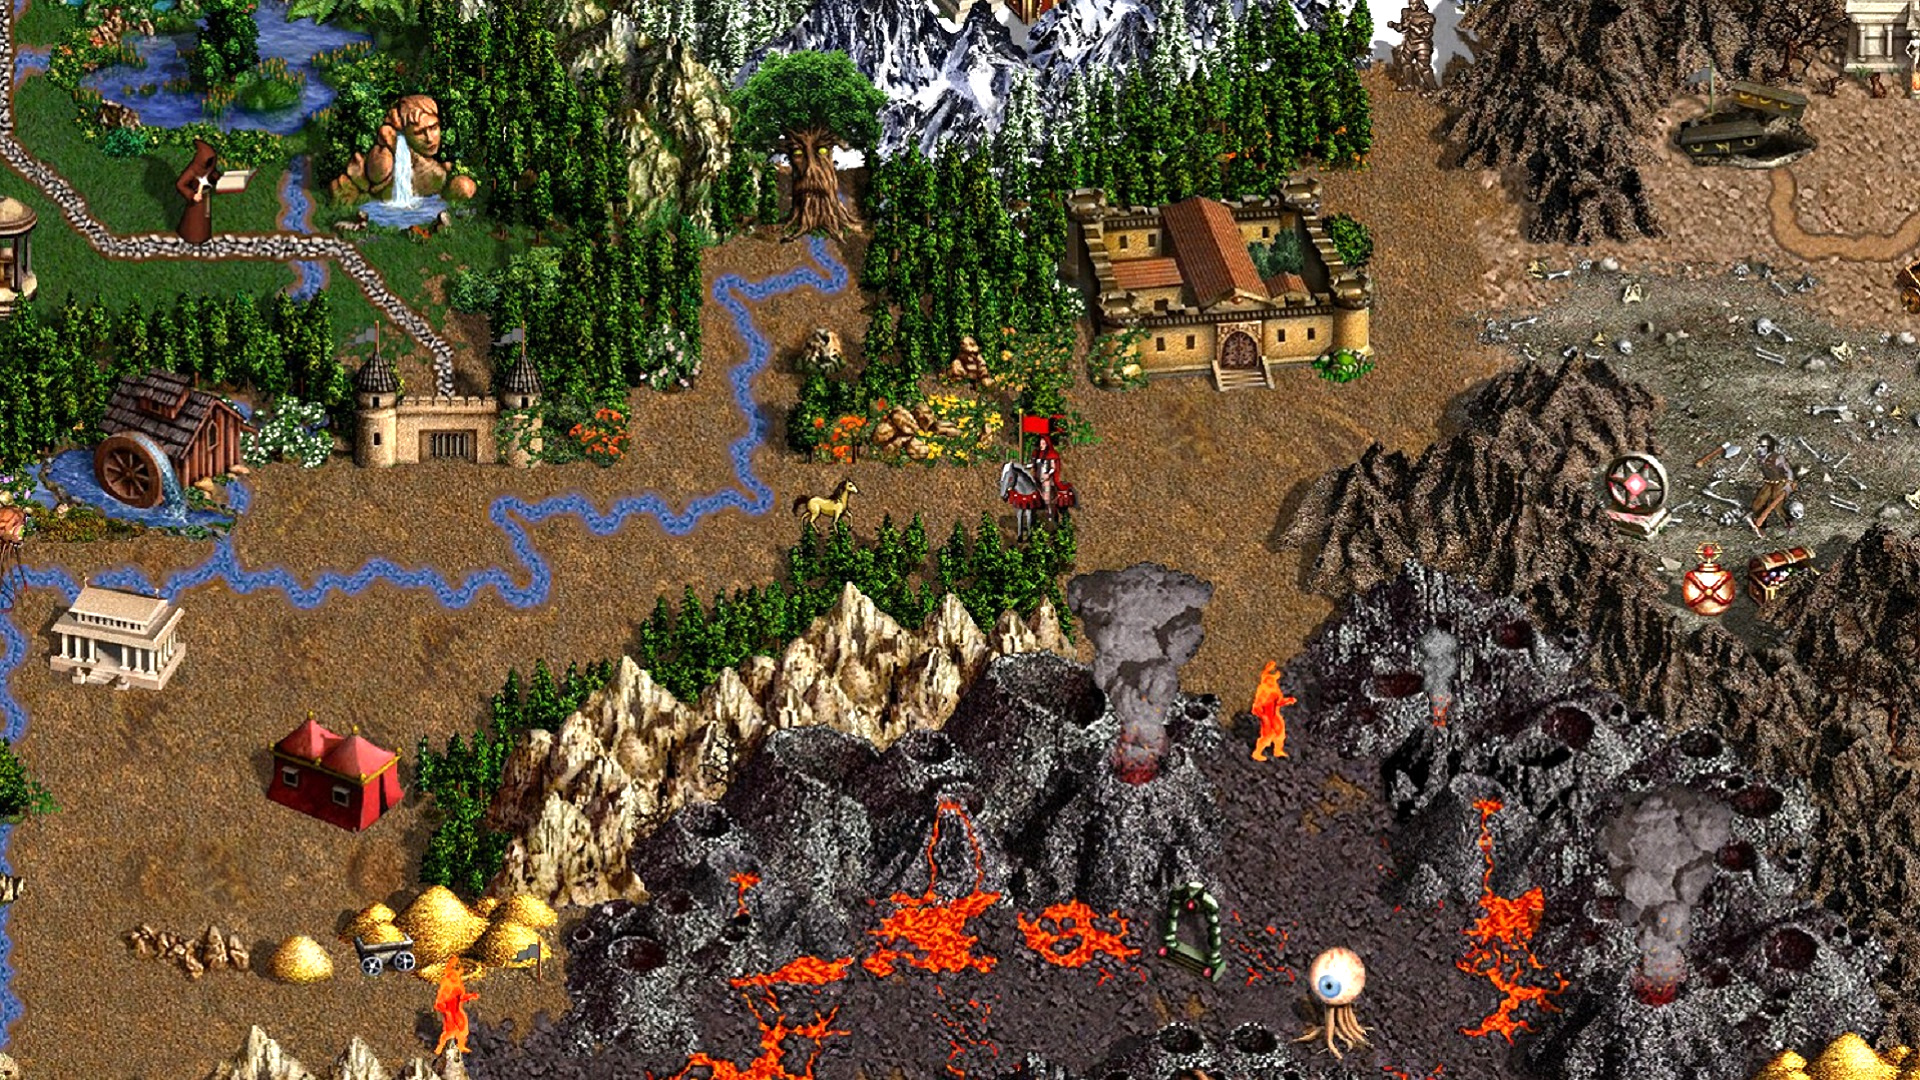 heroes of might and magic 3 best heroes